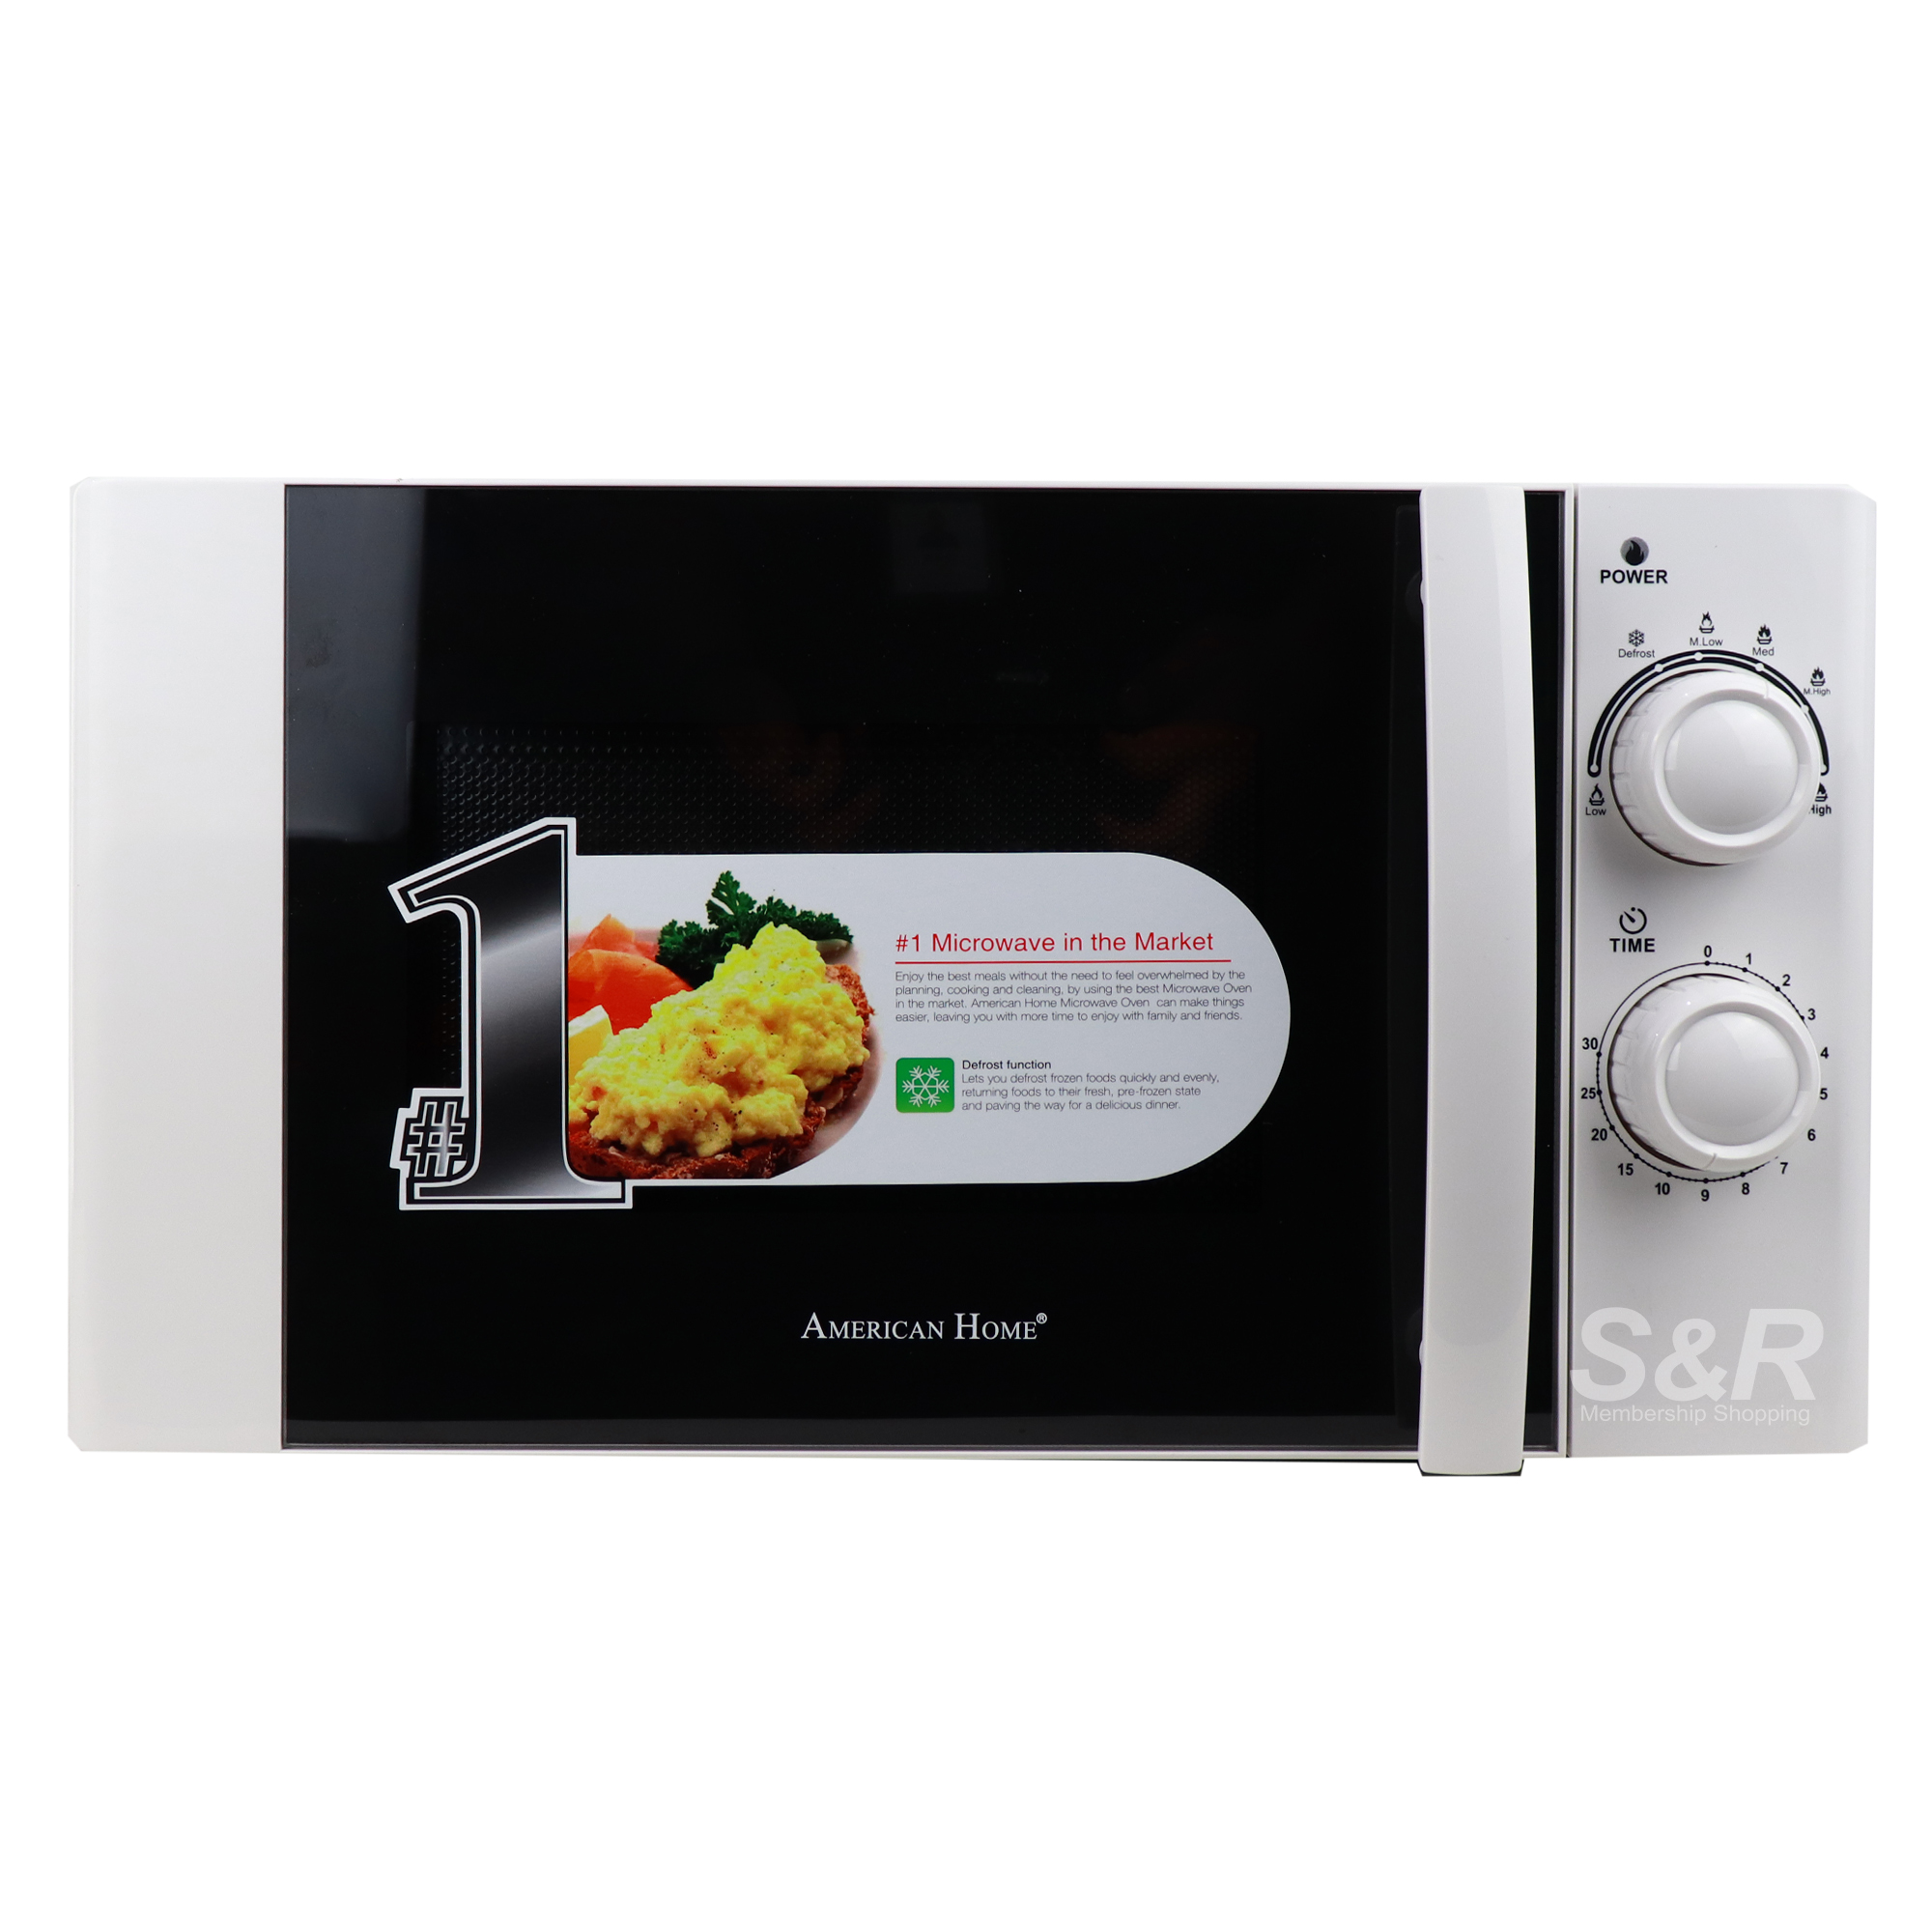 American Home Microwave Oven 20L AMW-25